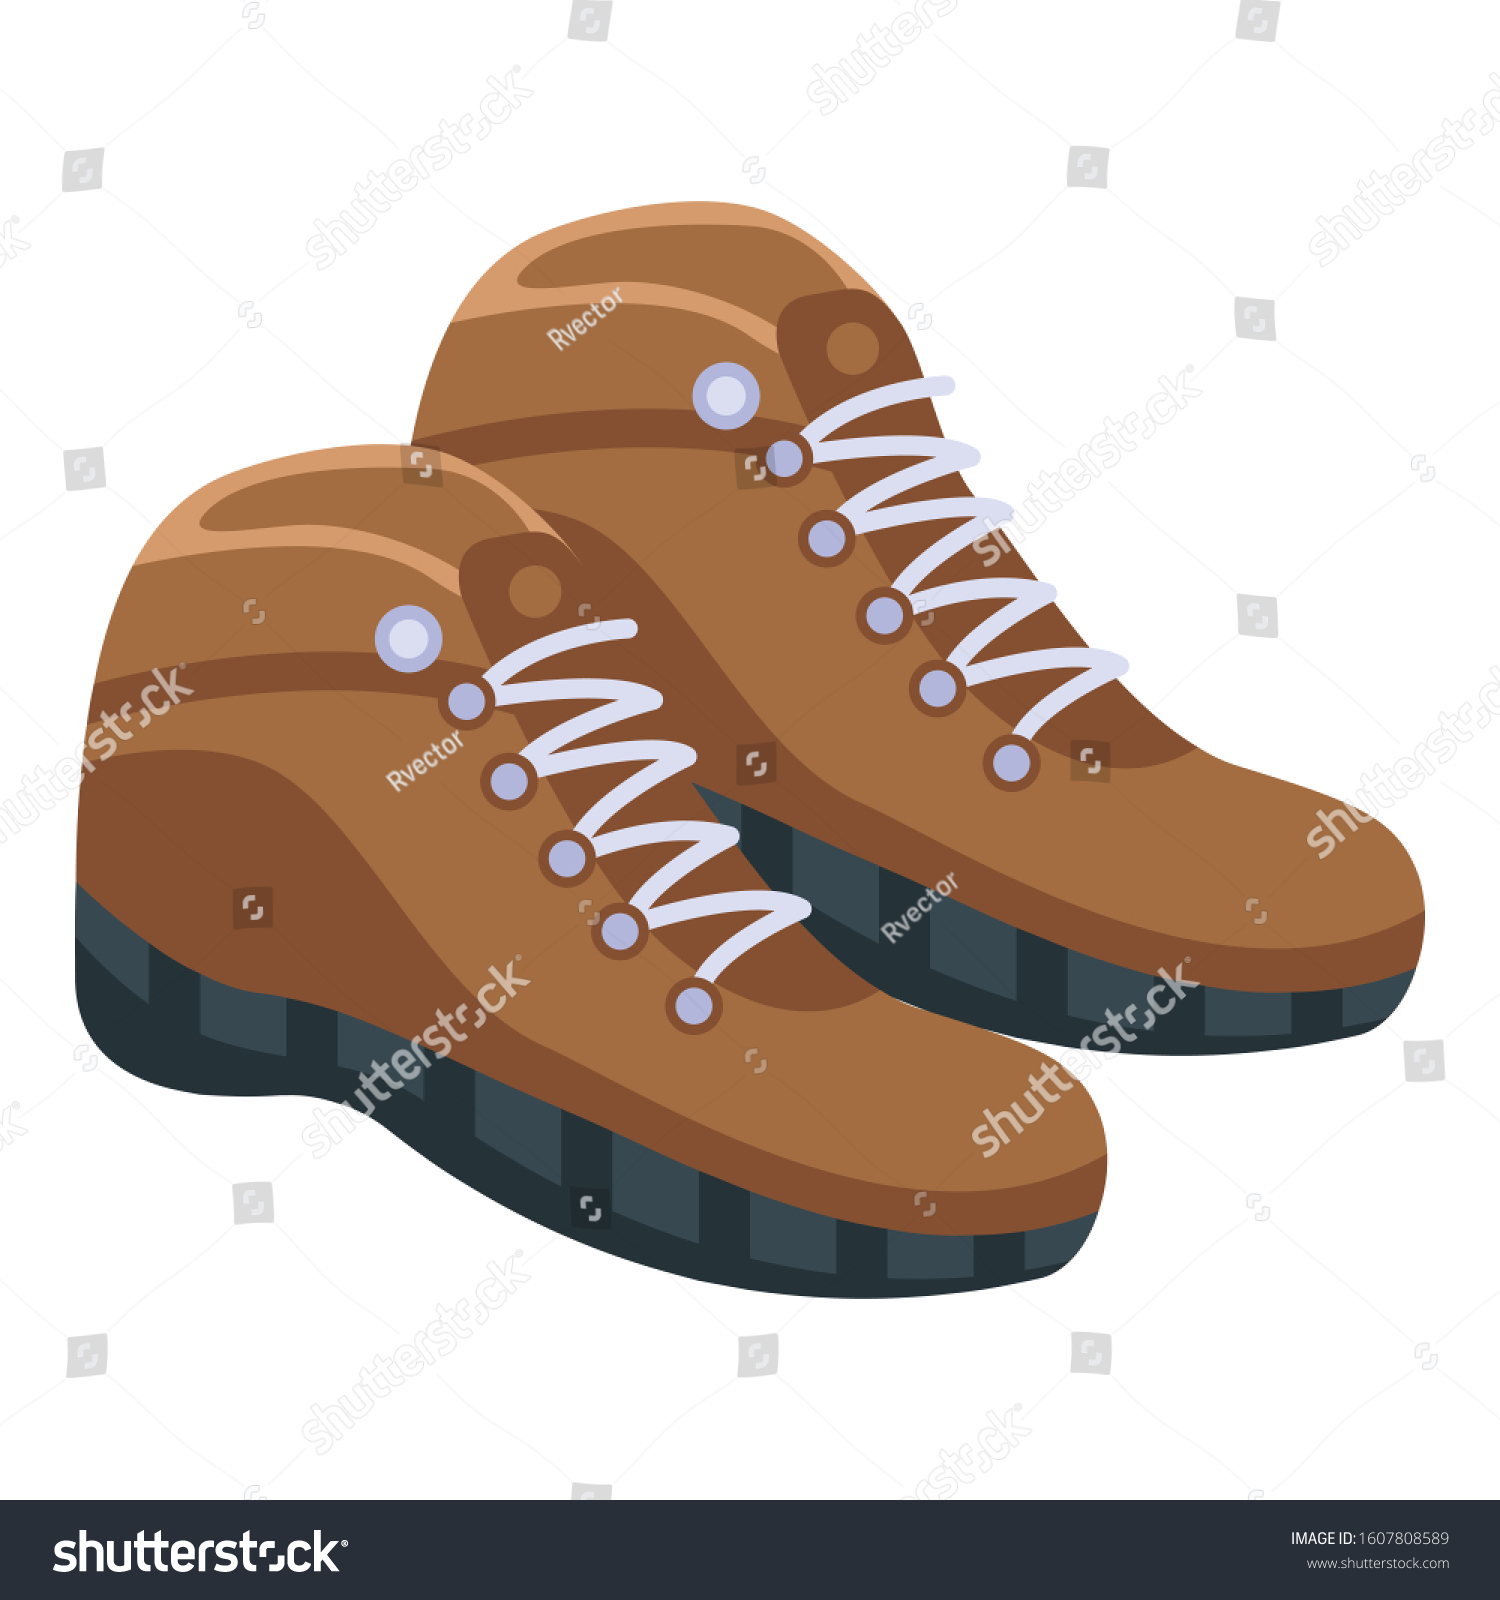 2,837 Isometric boots Images, Stock Photos & Vectors | Shutterstock